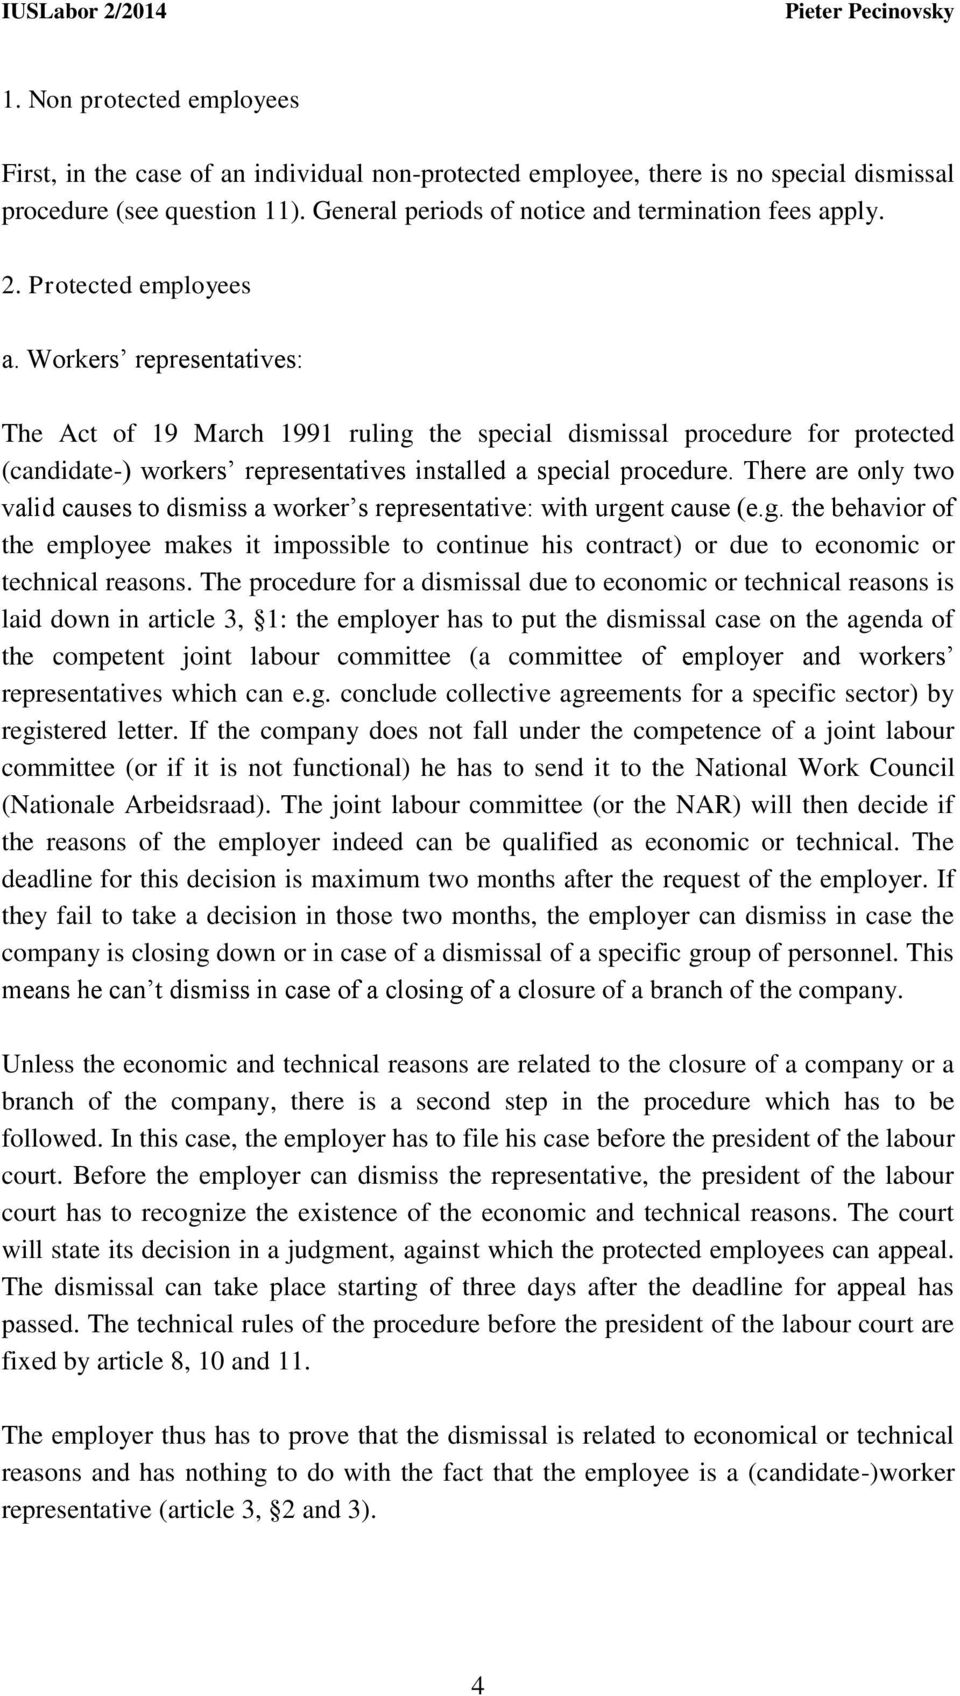 Workers representatives: The Act of 19 March 1991 ruling the special dismissal procedure for protected (candidate-) workers representatives installed a special procedure.